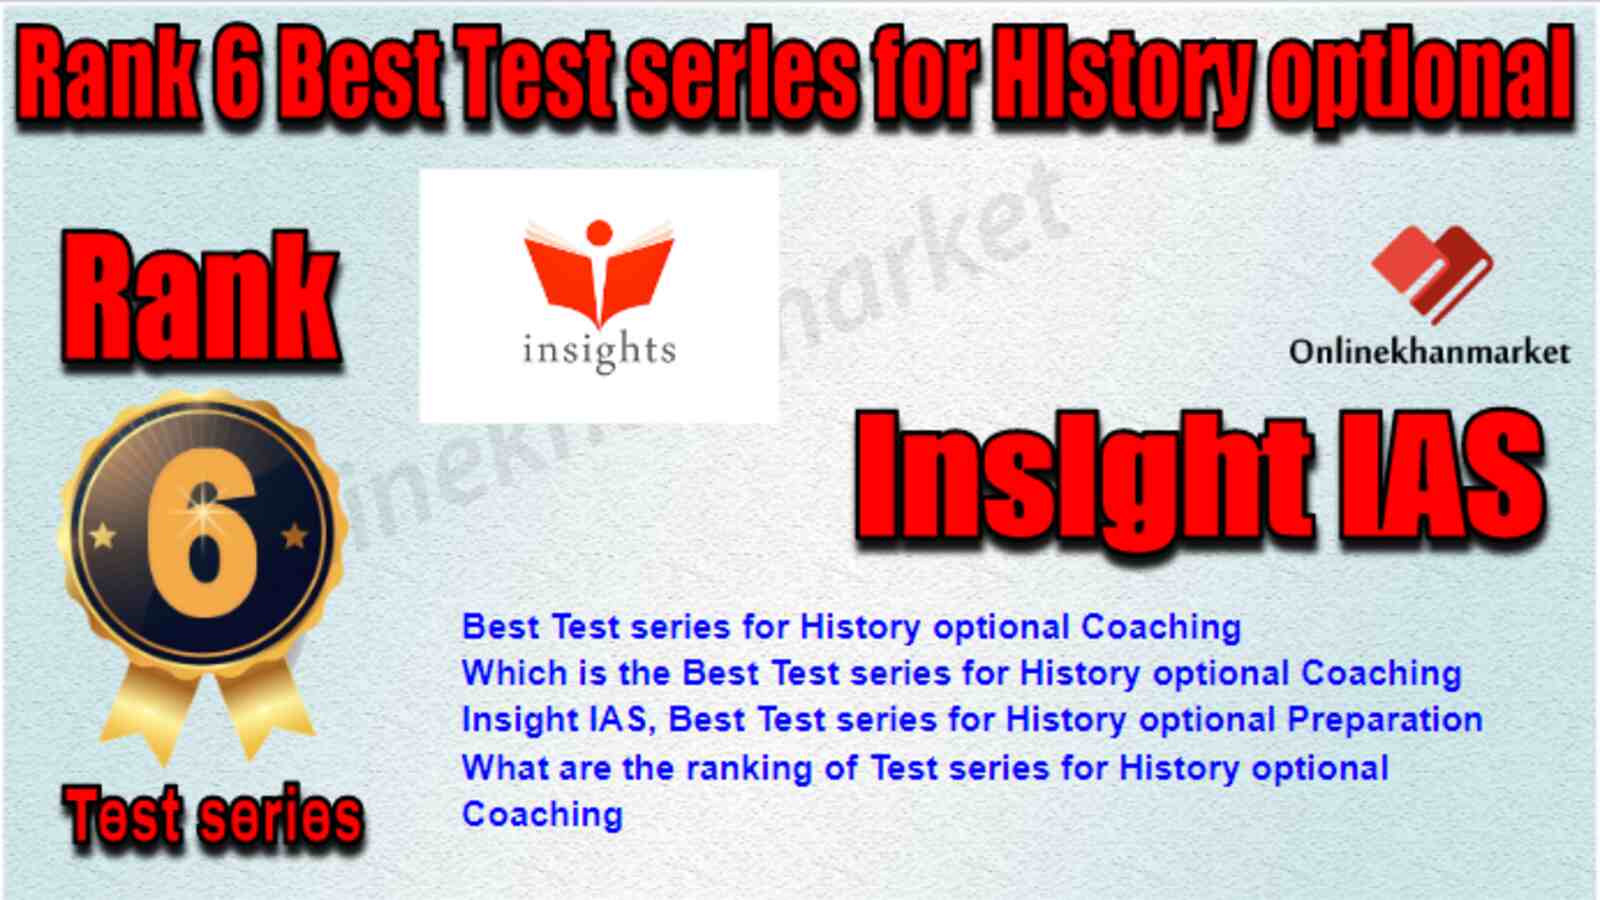 Rank 6 Best Test series for History optional